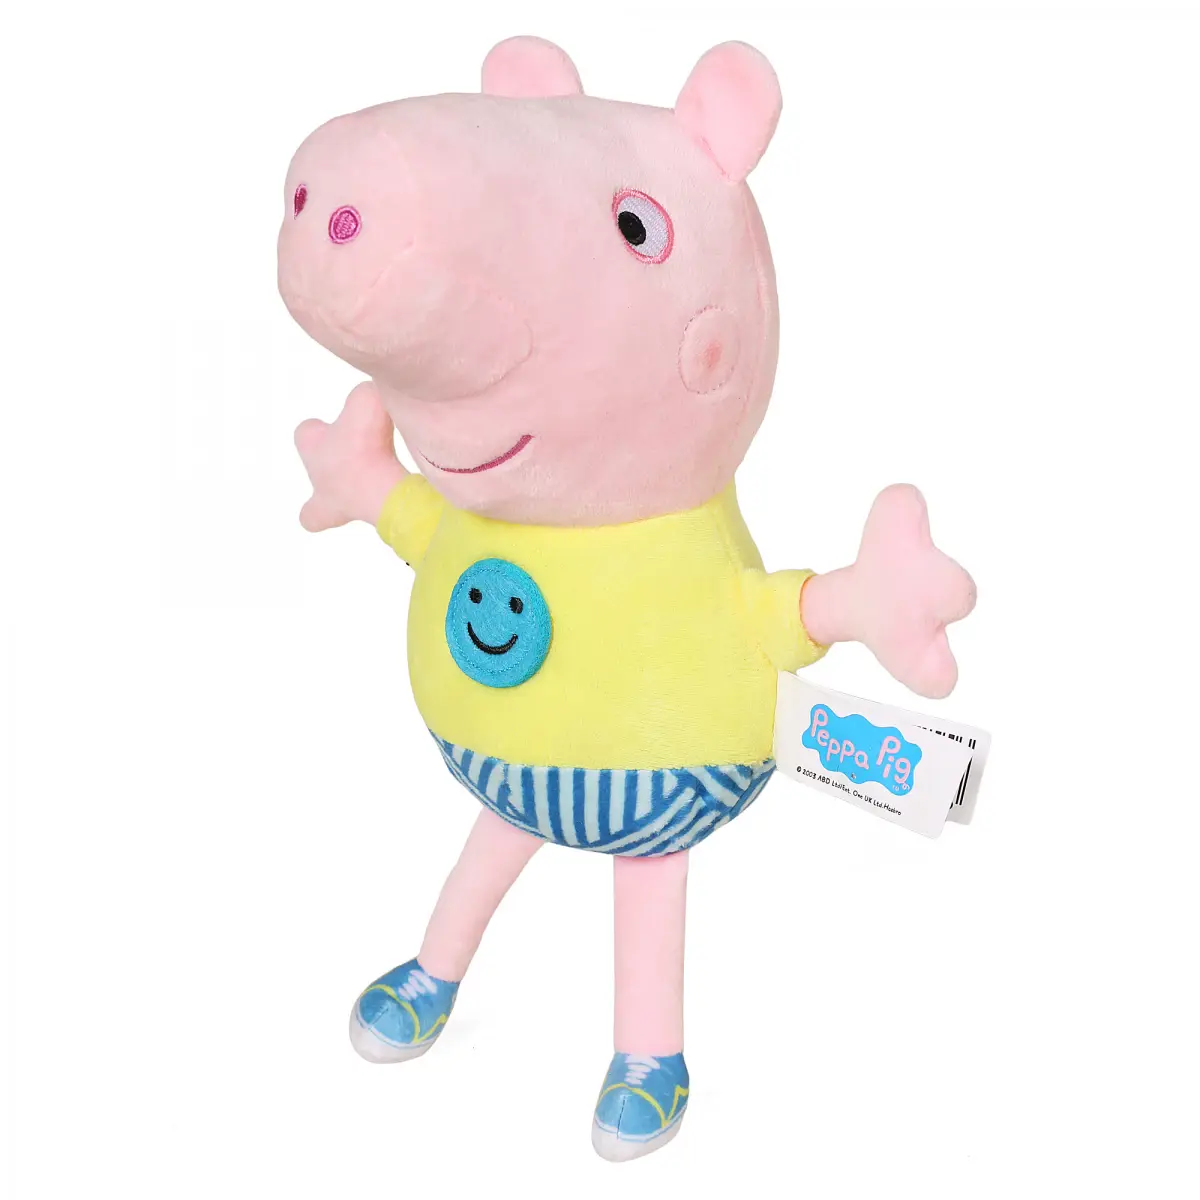 Peppa Pig George Pig Smiley Soft Toys for Kids, 30cm, 18M+, Multicolour